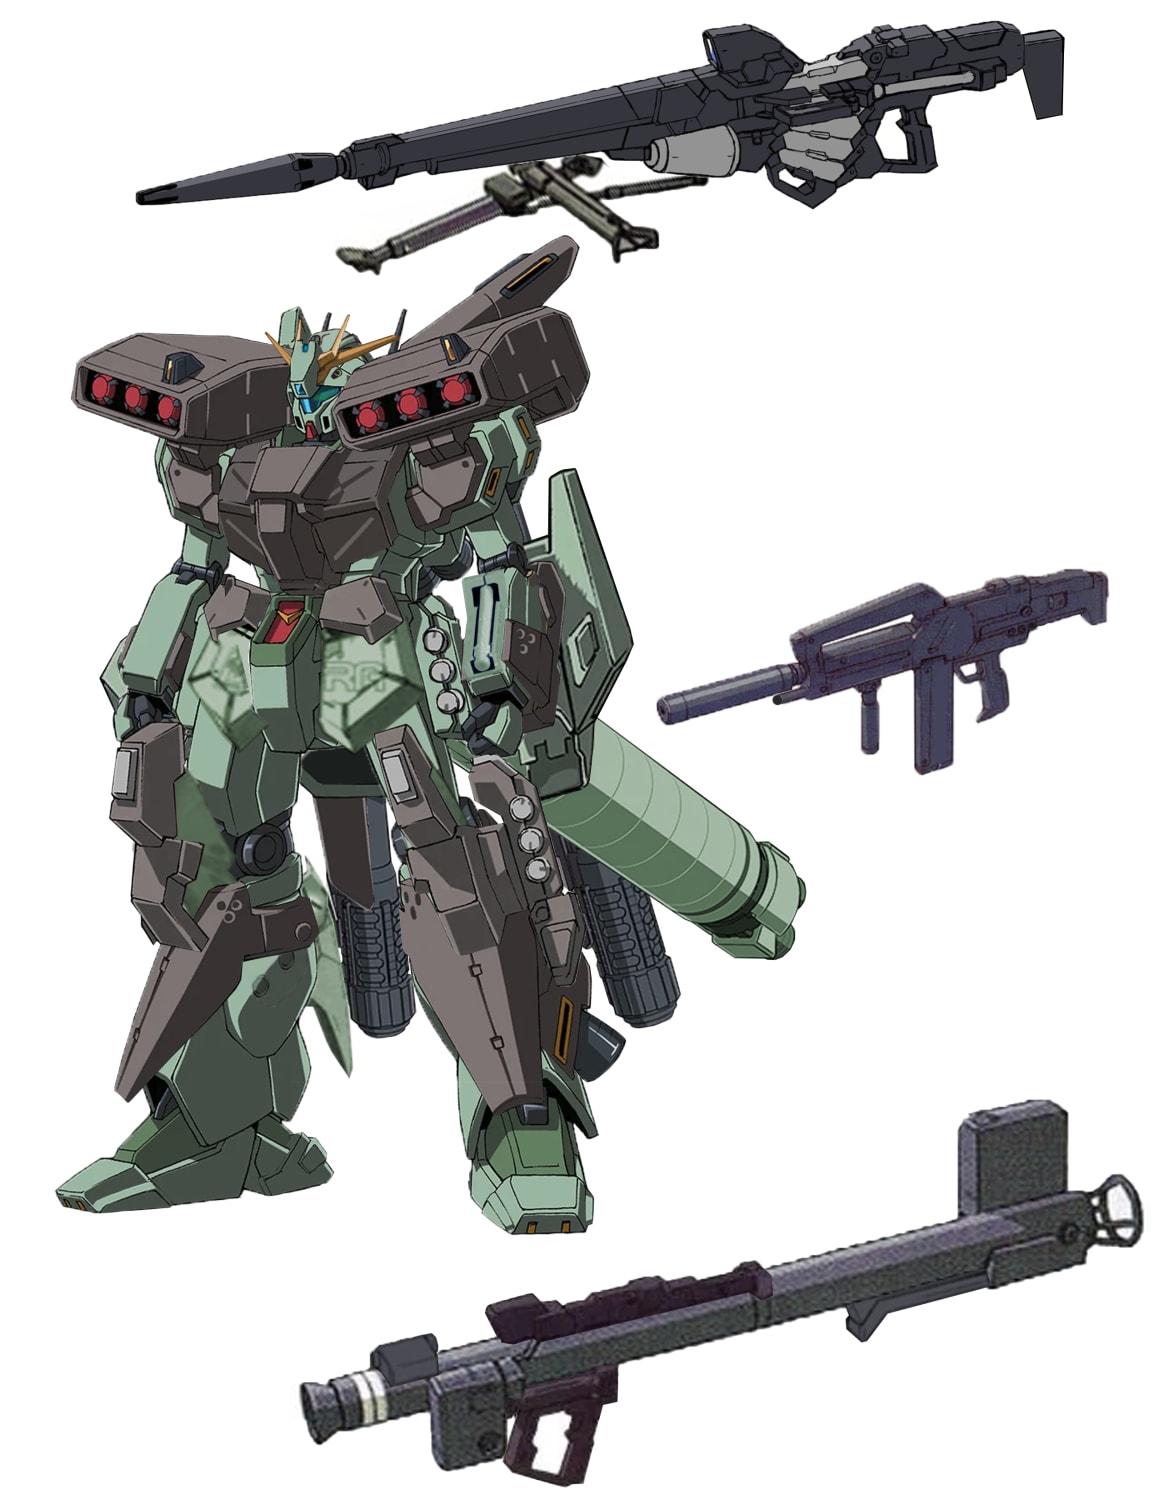 What if the Stark Jegan pilot somehow managed to beat/disable the Kshatriya? This is the Gundam of that alternate universe, the Jaeger Gundam + its weapons